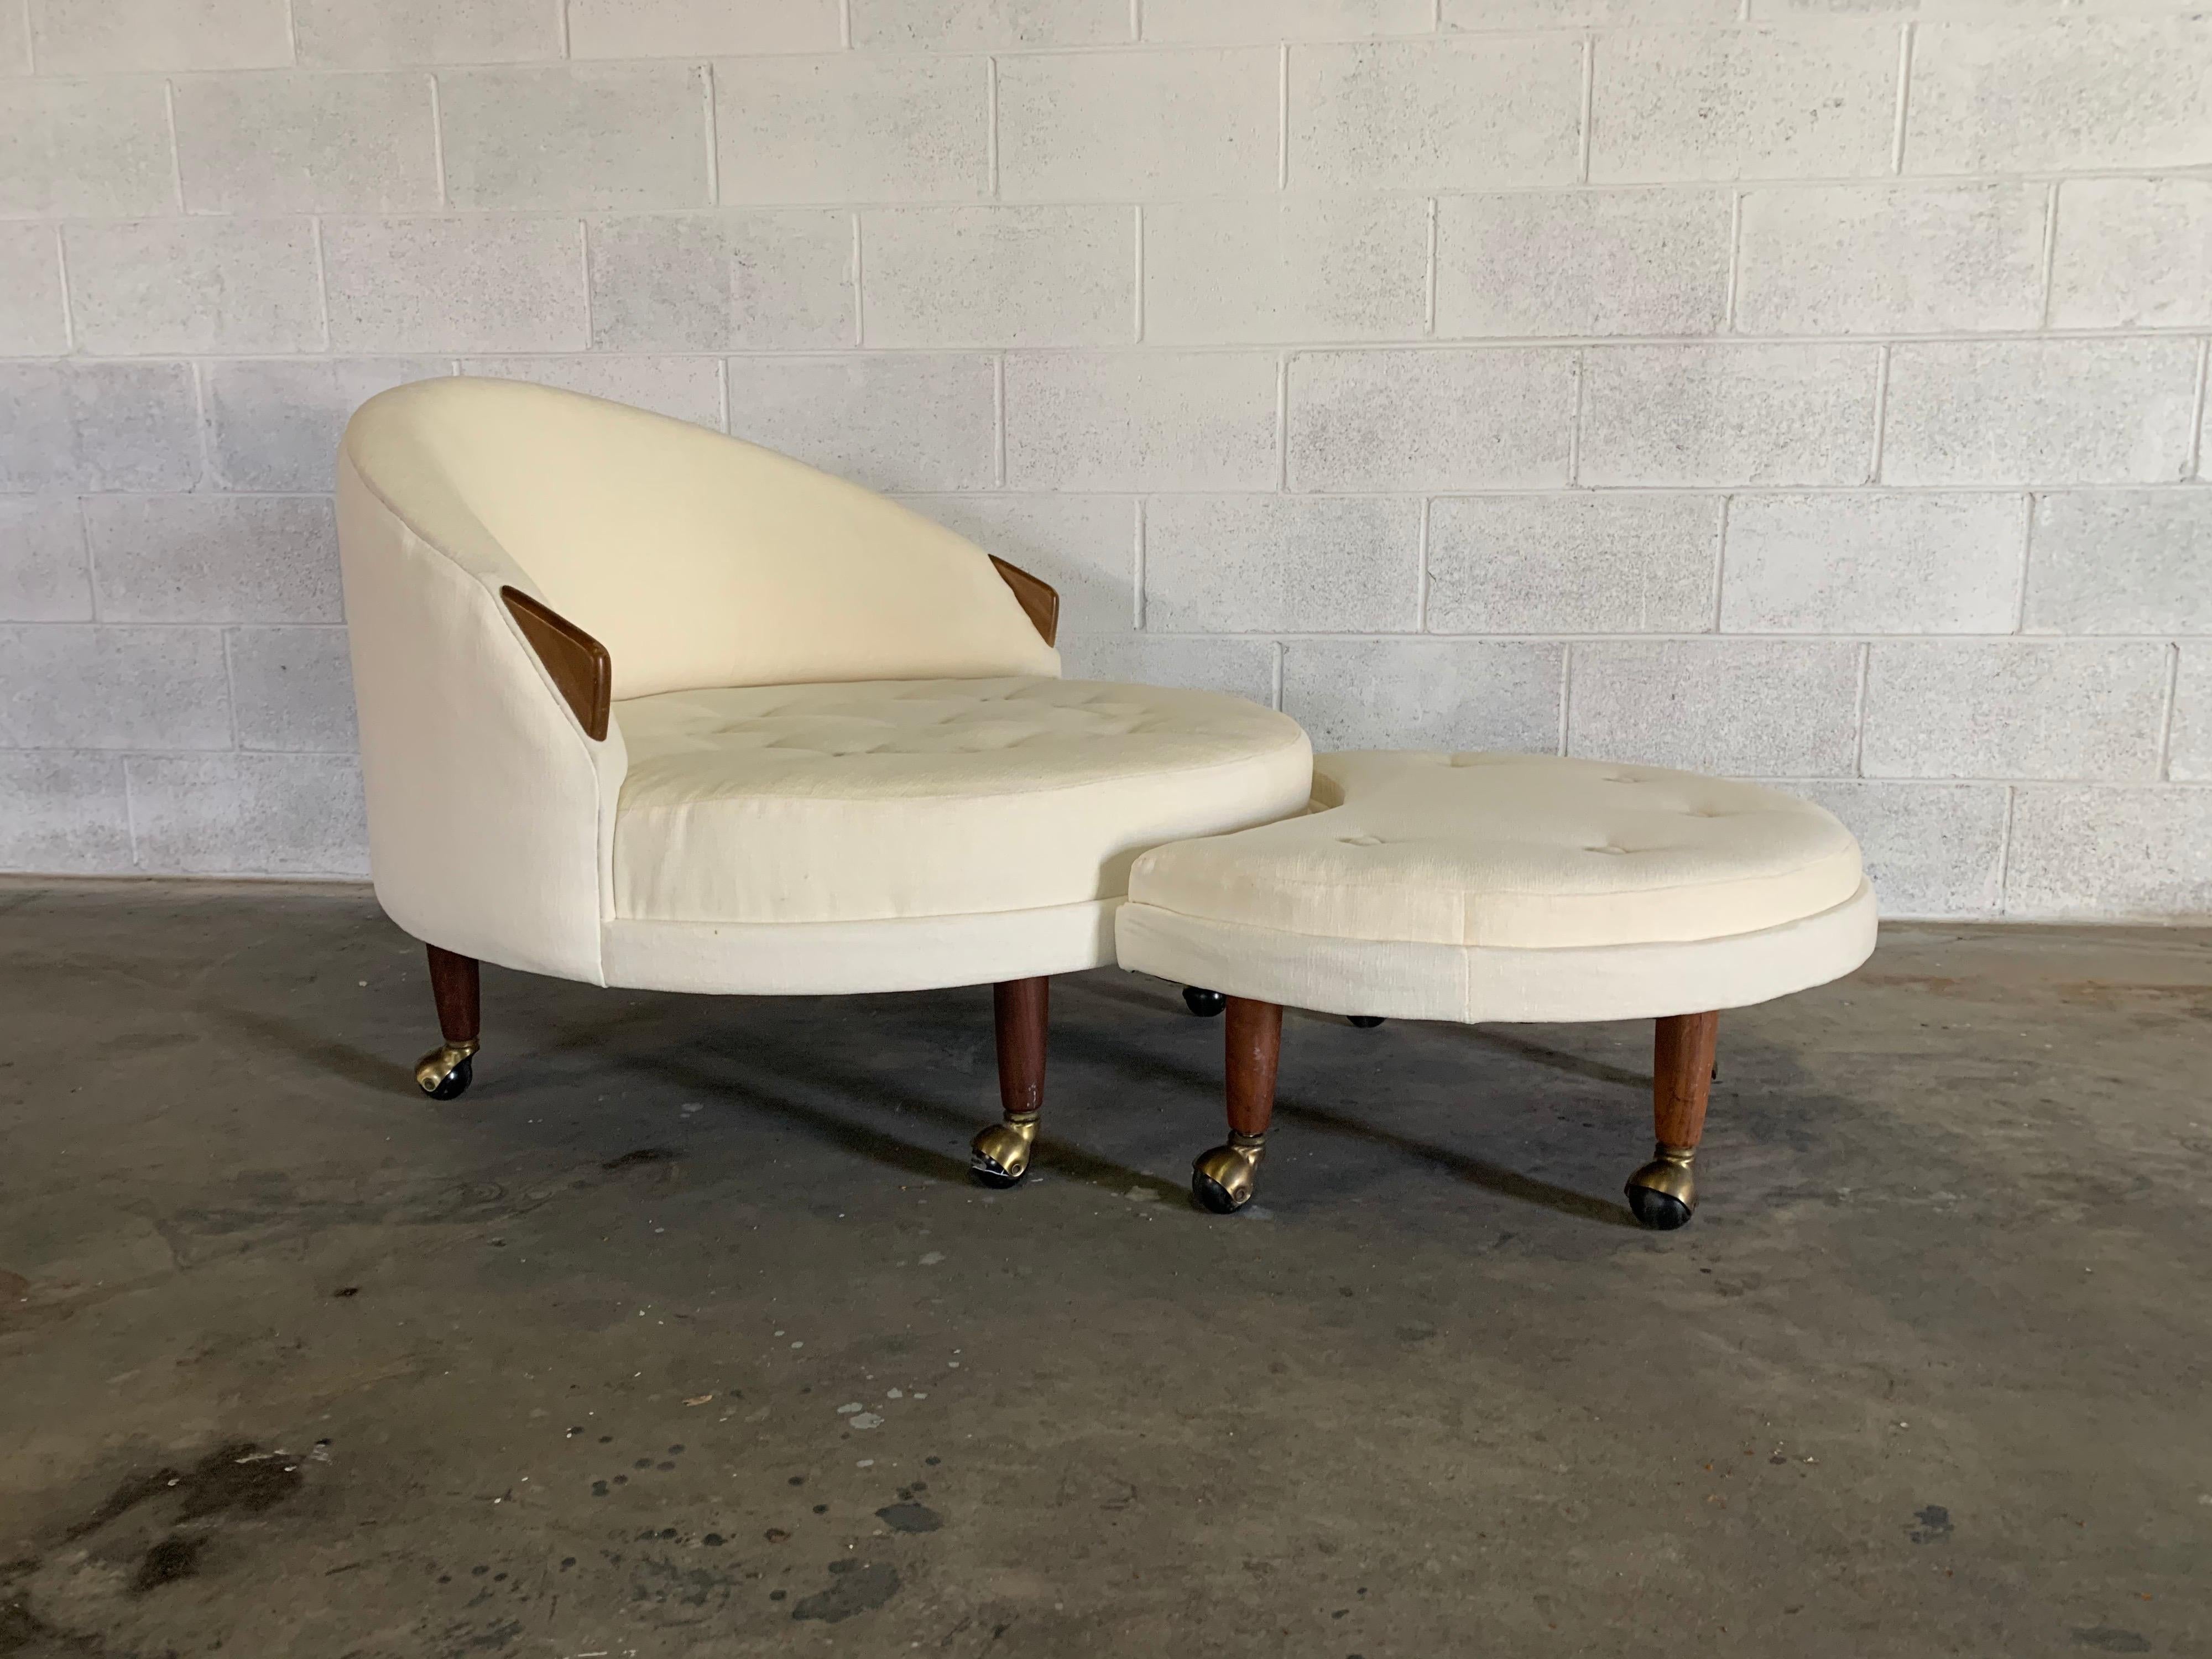 Adrian Pearsall for Craft Associates, 'Havana' lounge chair and ottoman, walnut and Crypton ultimate performance home fabric.
Crypton is engineered on a molecular level and provides superior performance to any upholstery fabric today. It is stain